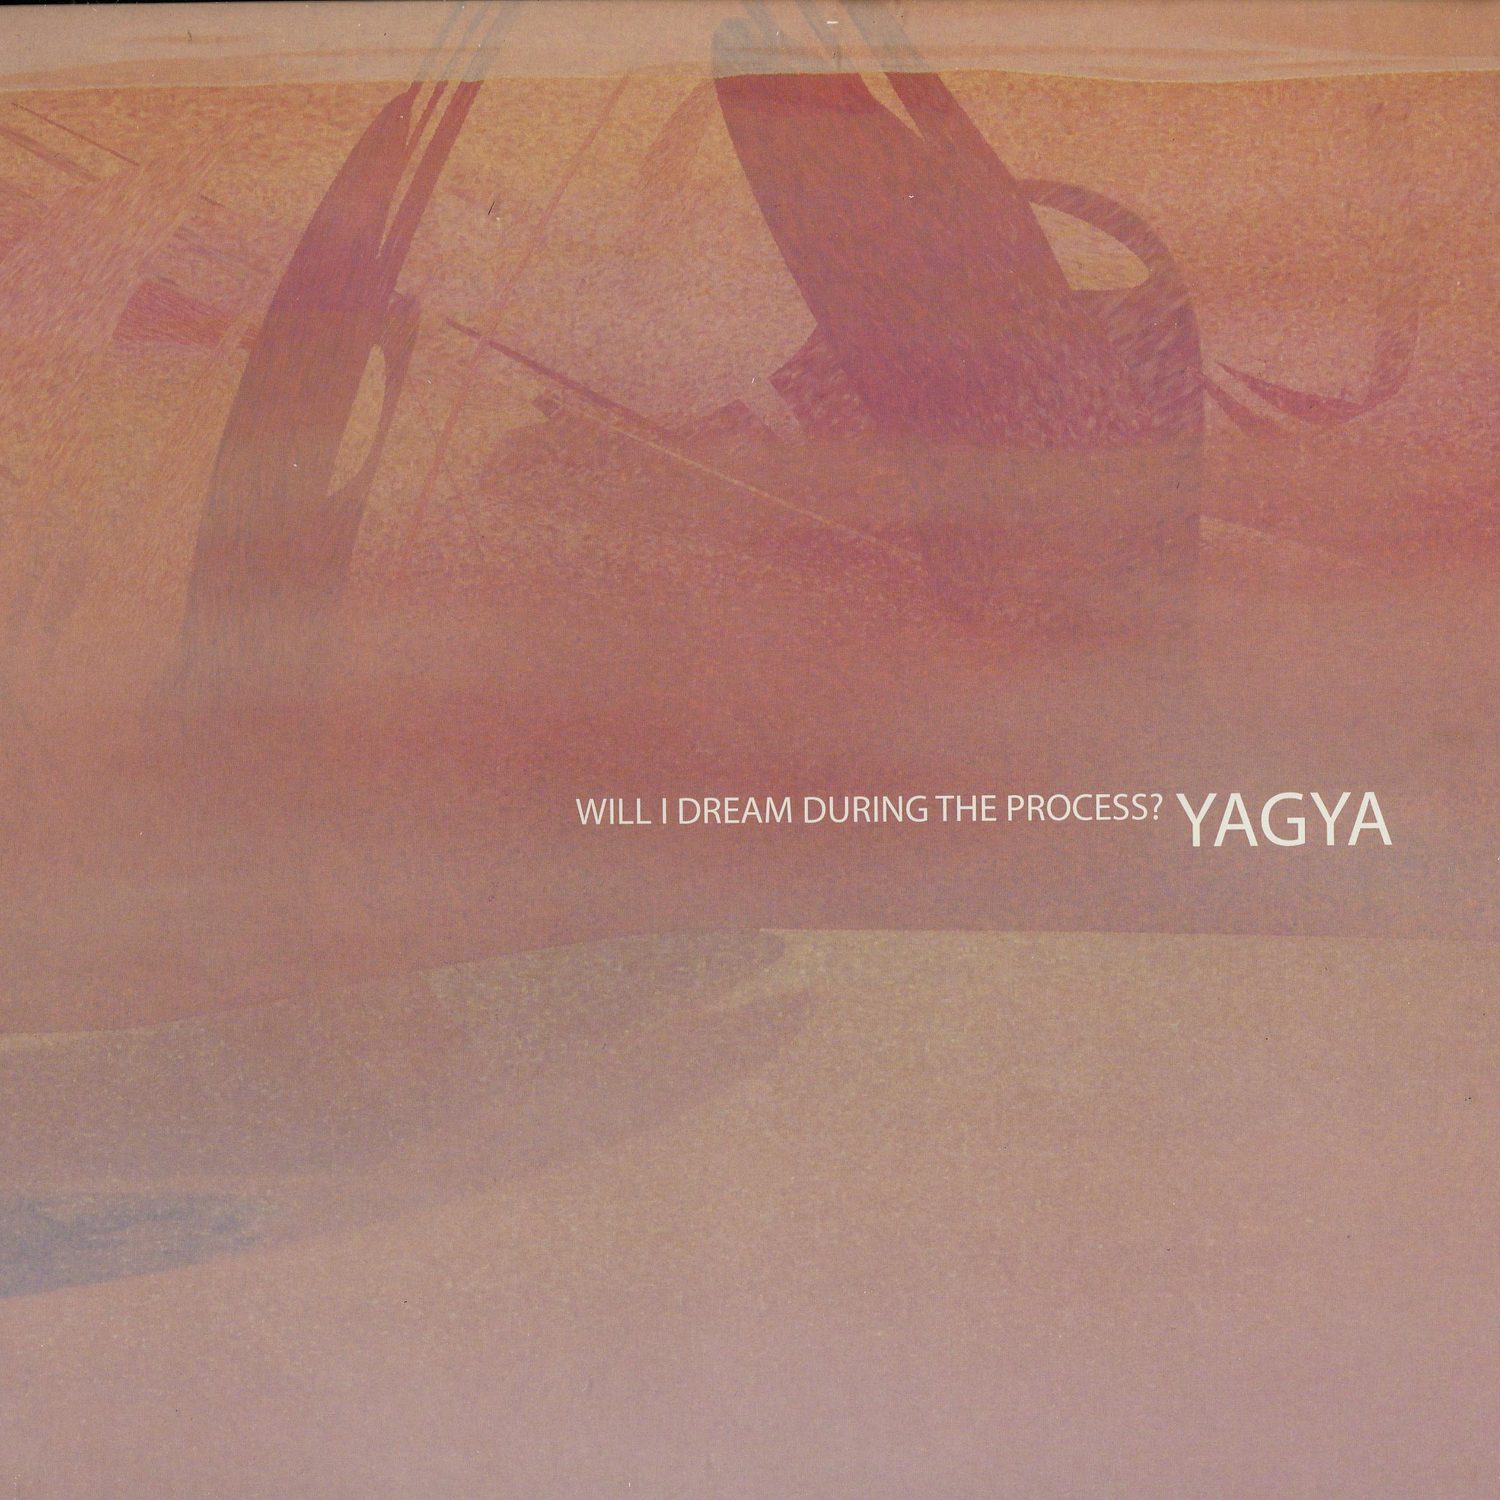 Yagya - WILL I DREAM DURING THE PROCESS? 